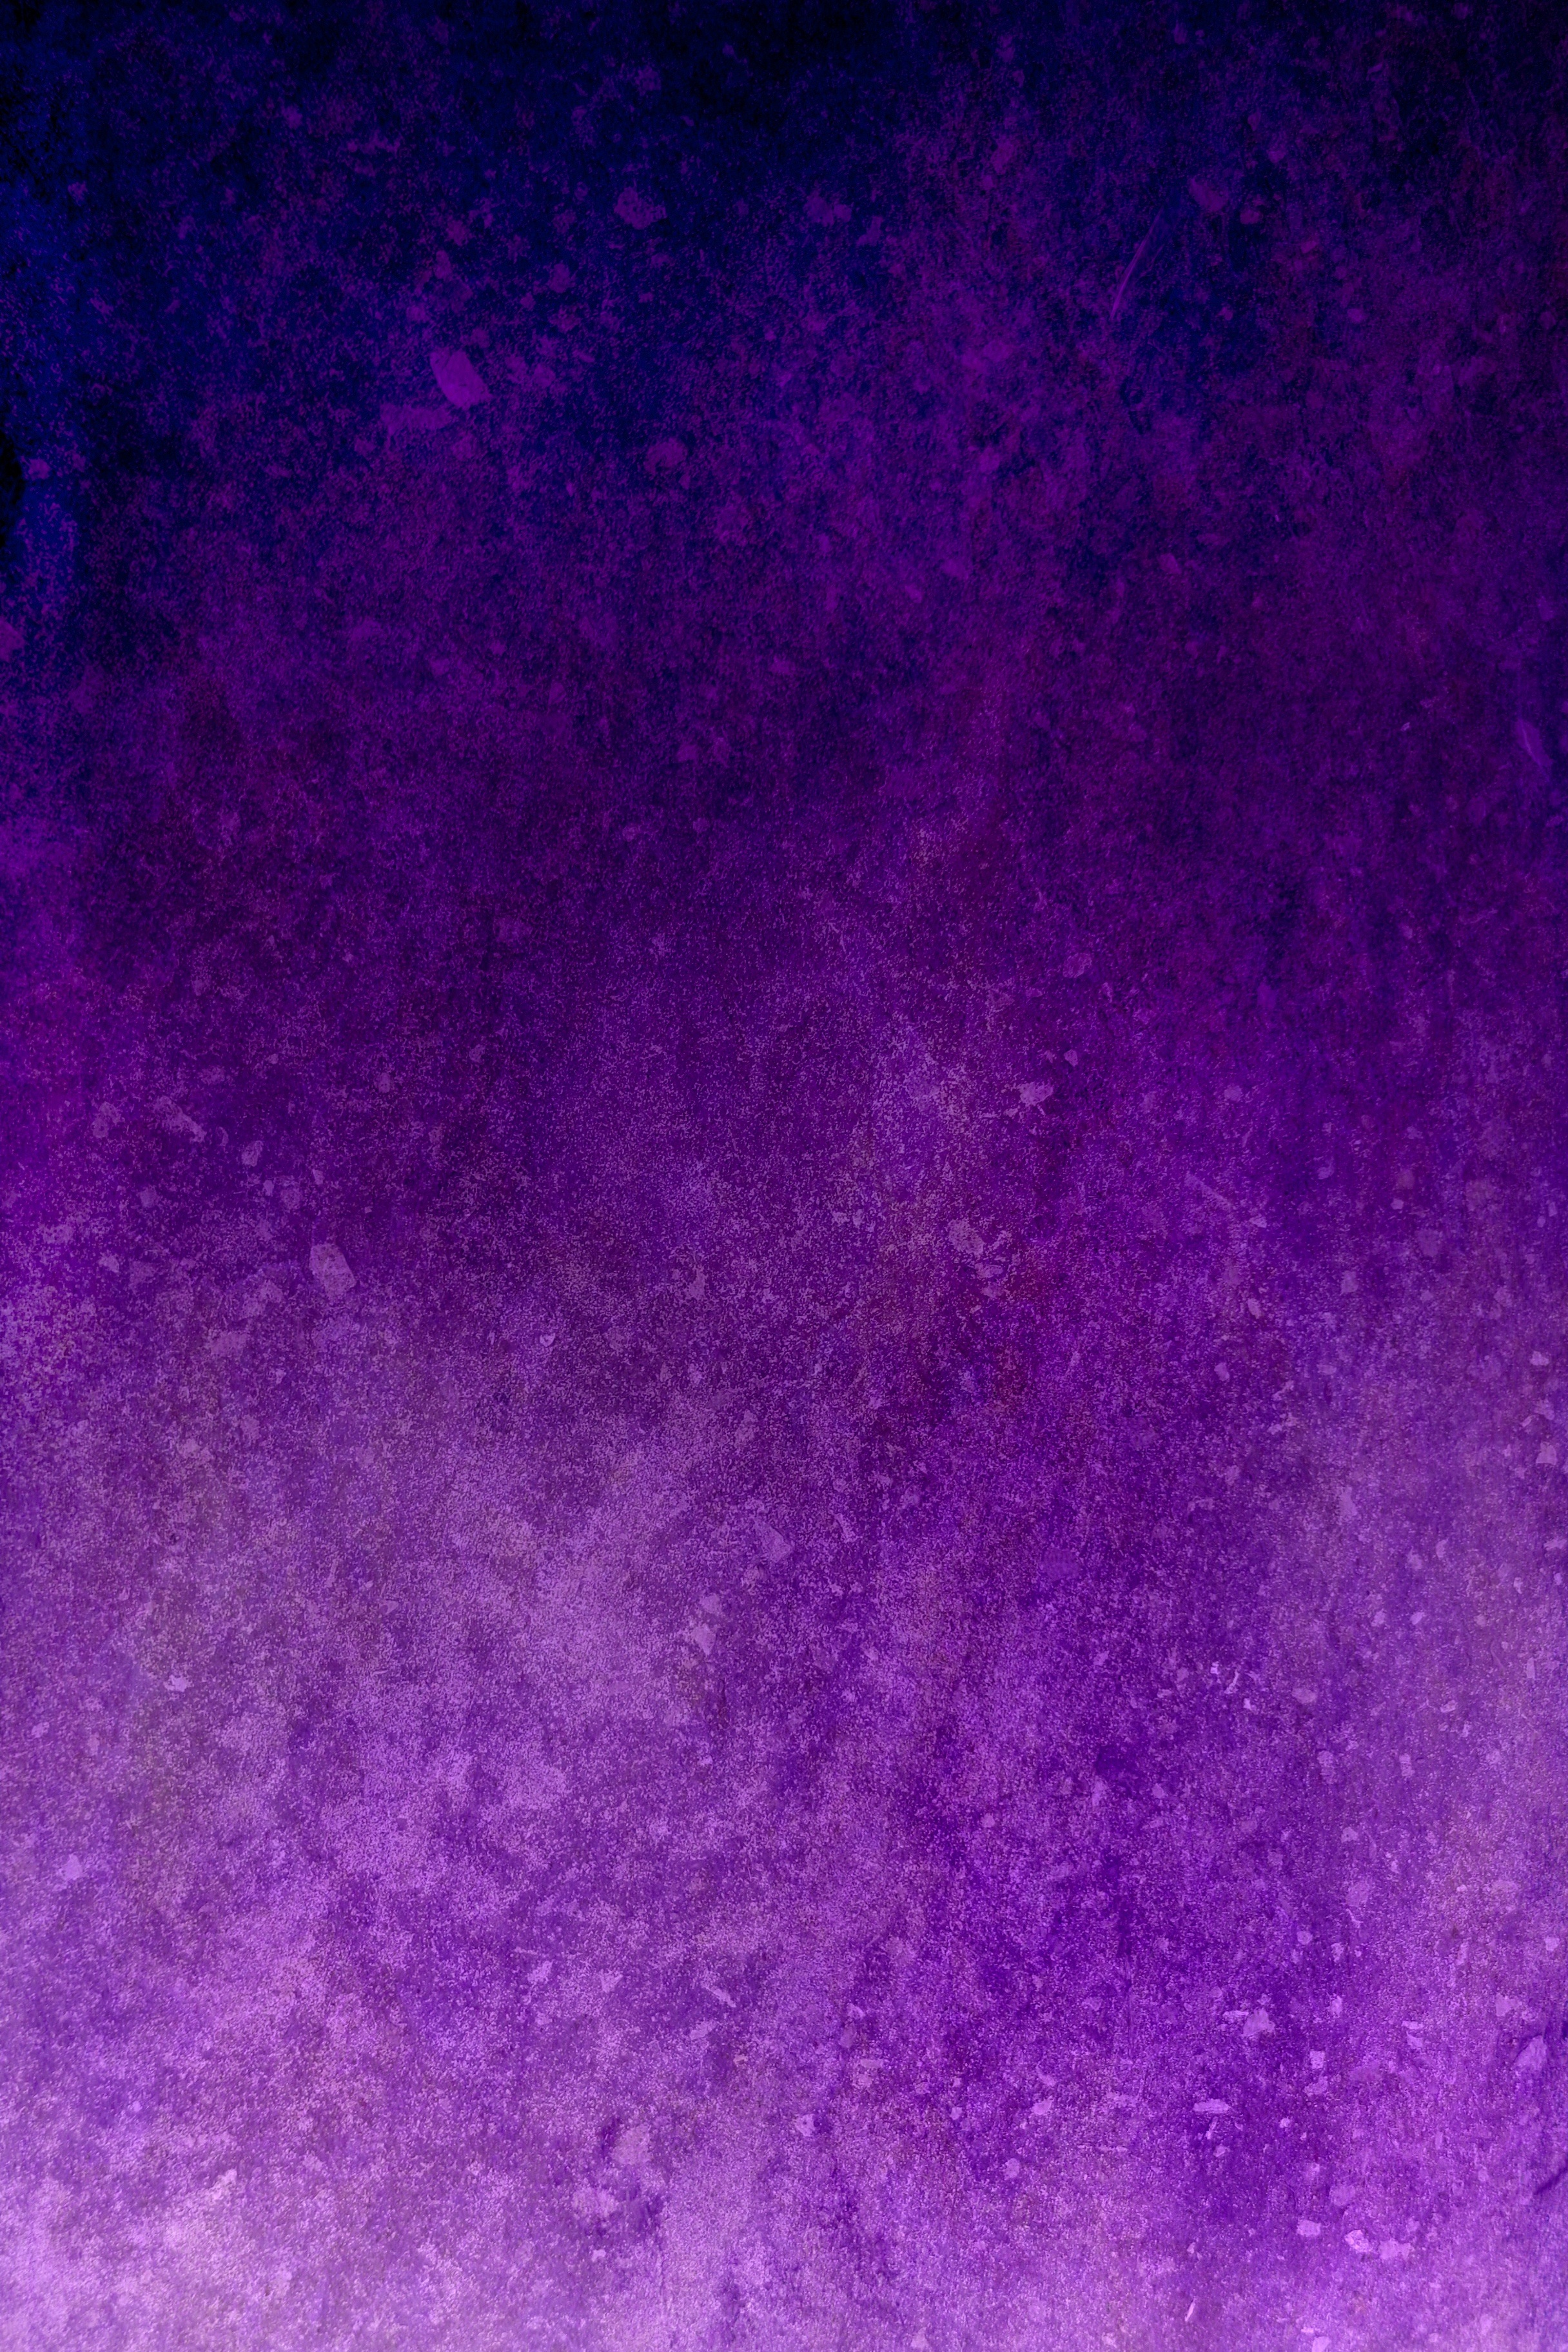 textures, tint, purple, background, violet, texture, stains, spots, shade